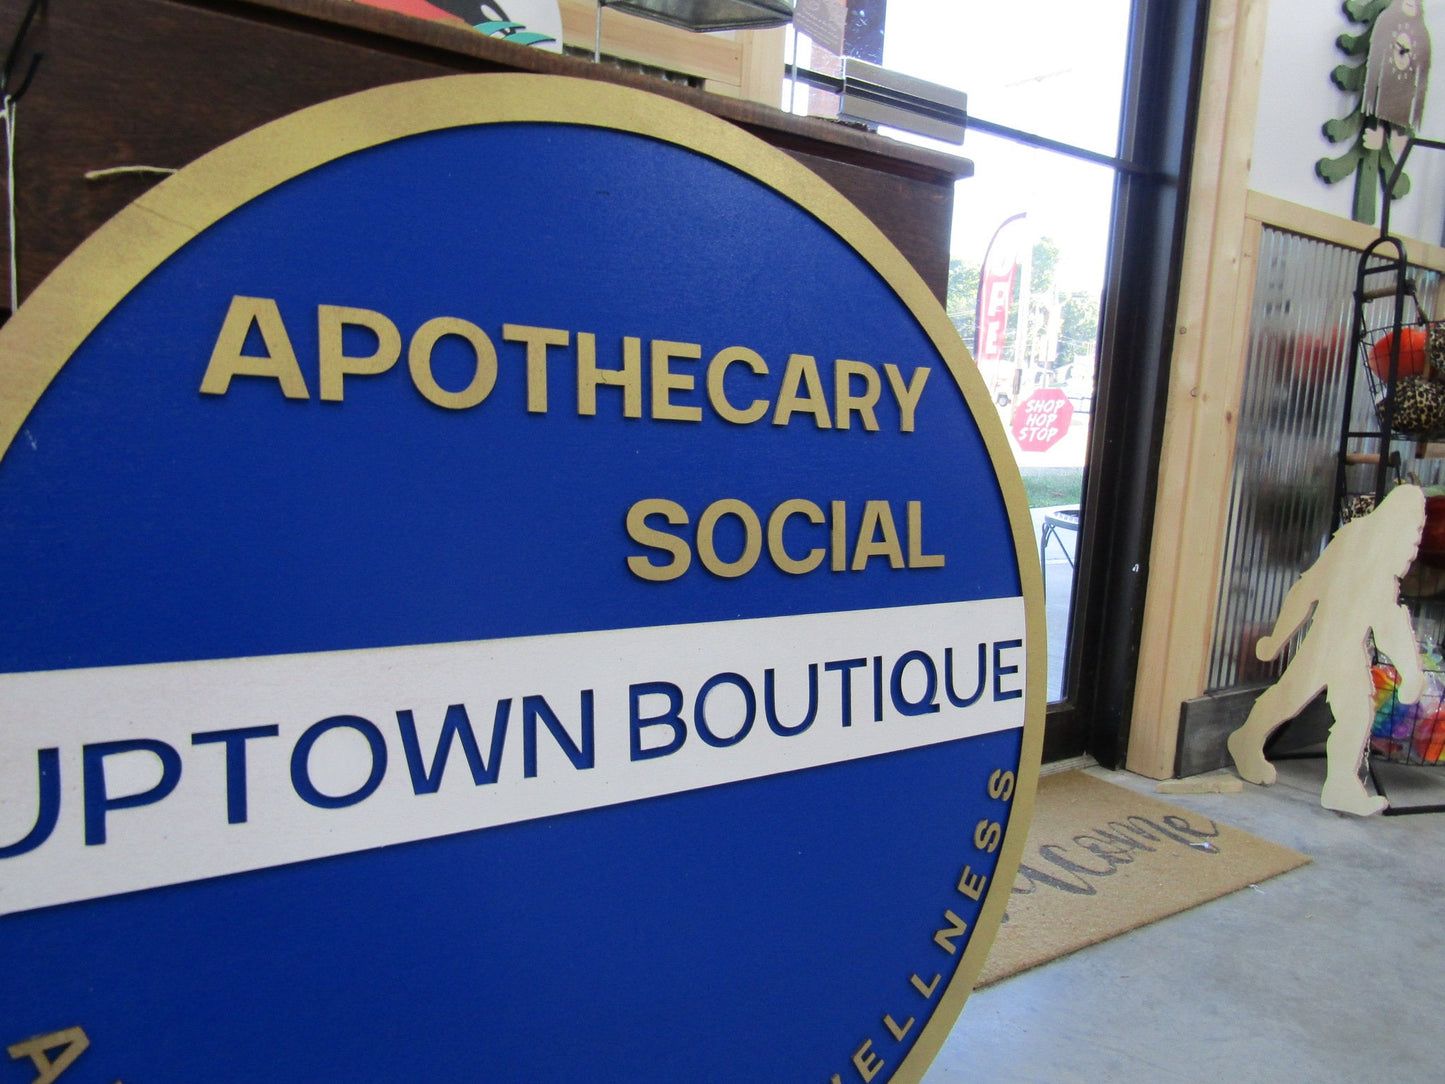 Custom Sign Round Business Uptown Boutique Social Commerical Signage Single Or Double Sided Made to Order Store Logo Circle Wooden Handmade